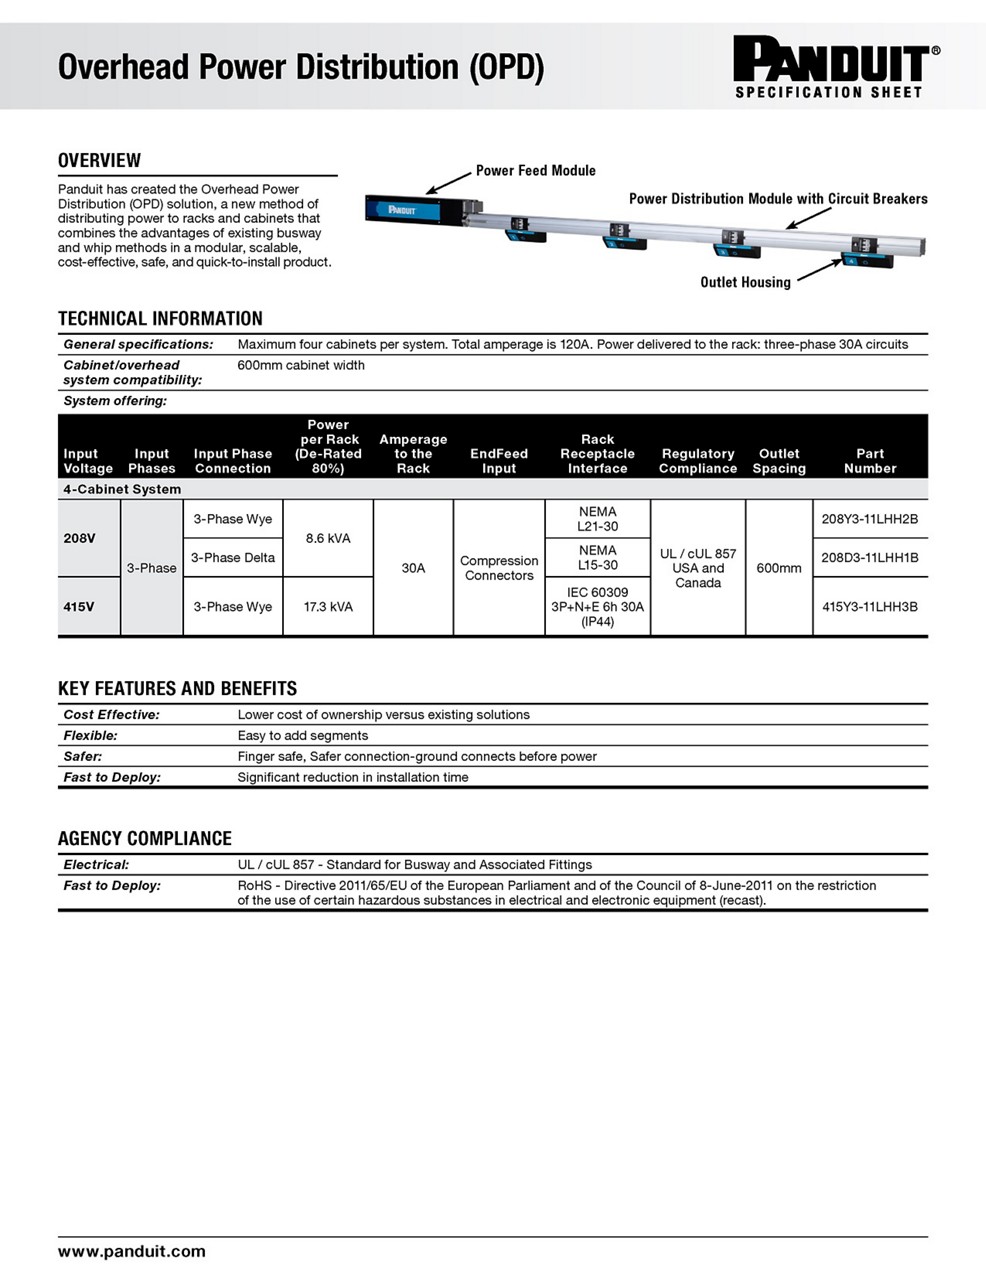 Image of the Overhead Power Distribution (OPD) Spec Sheet